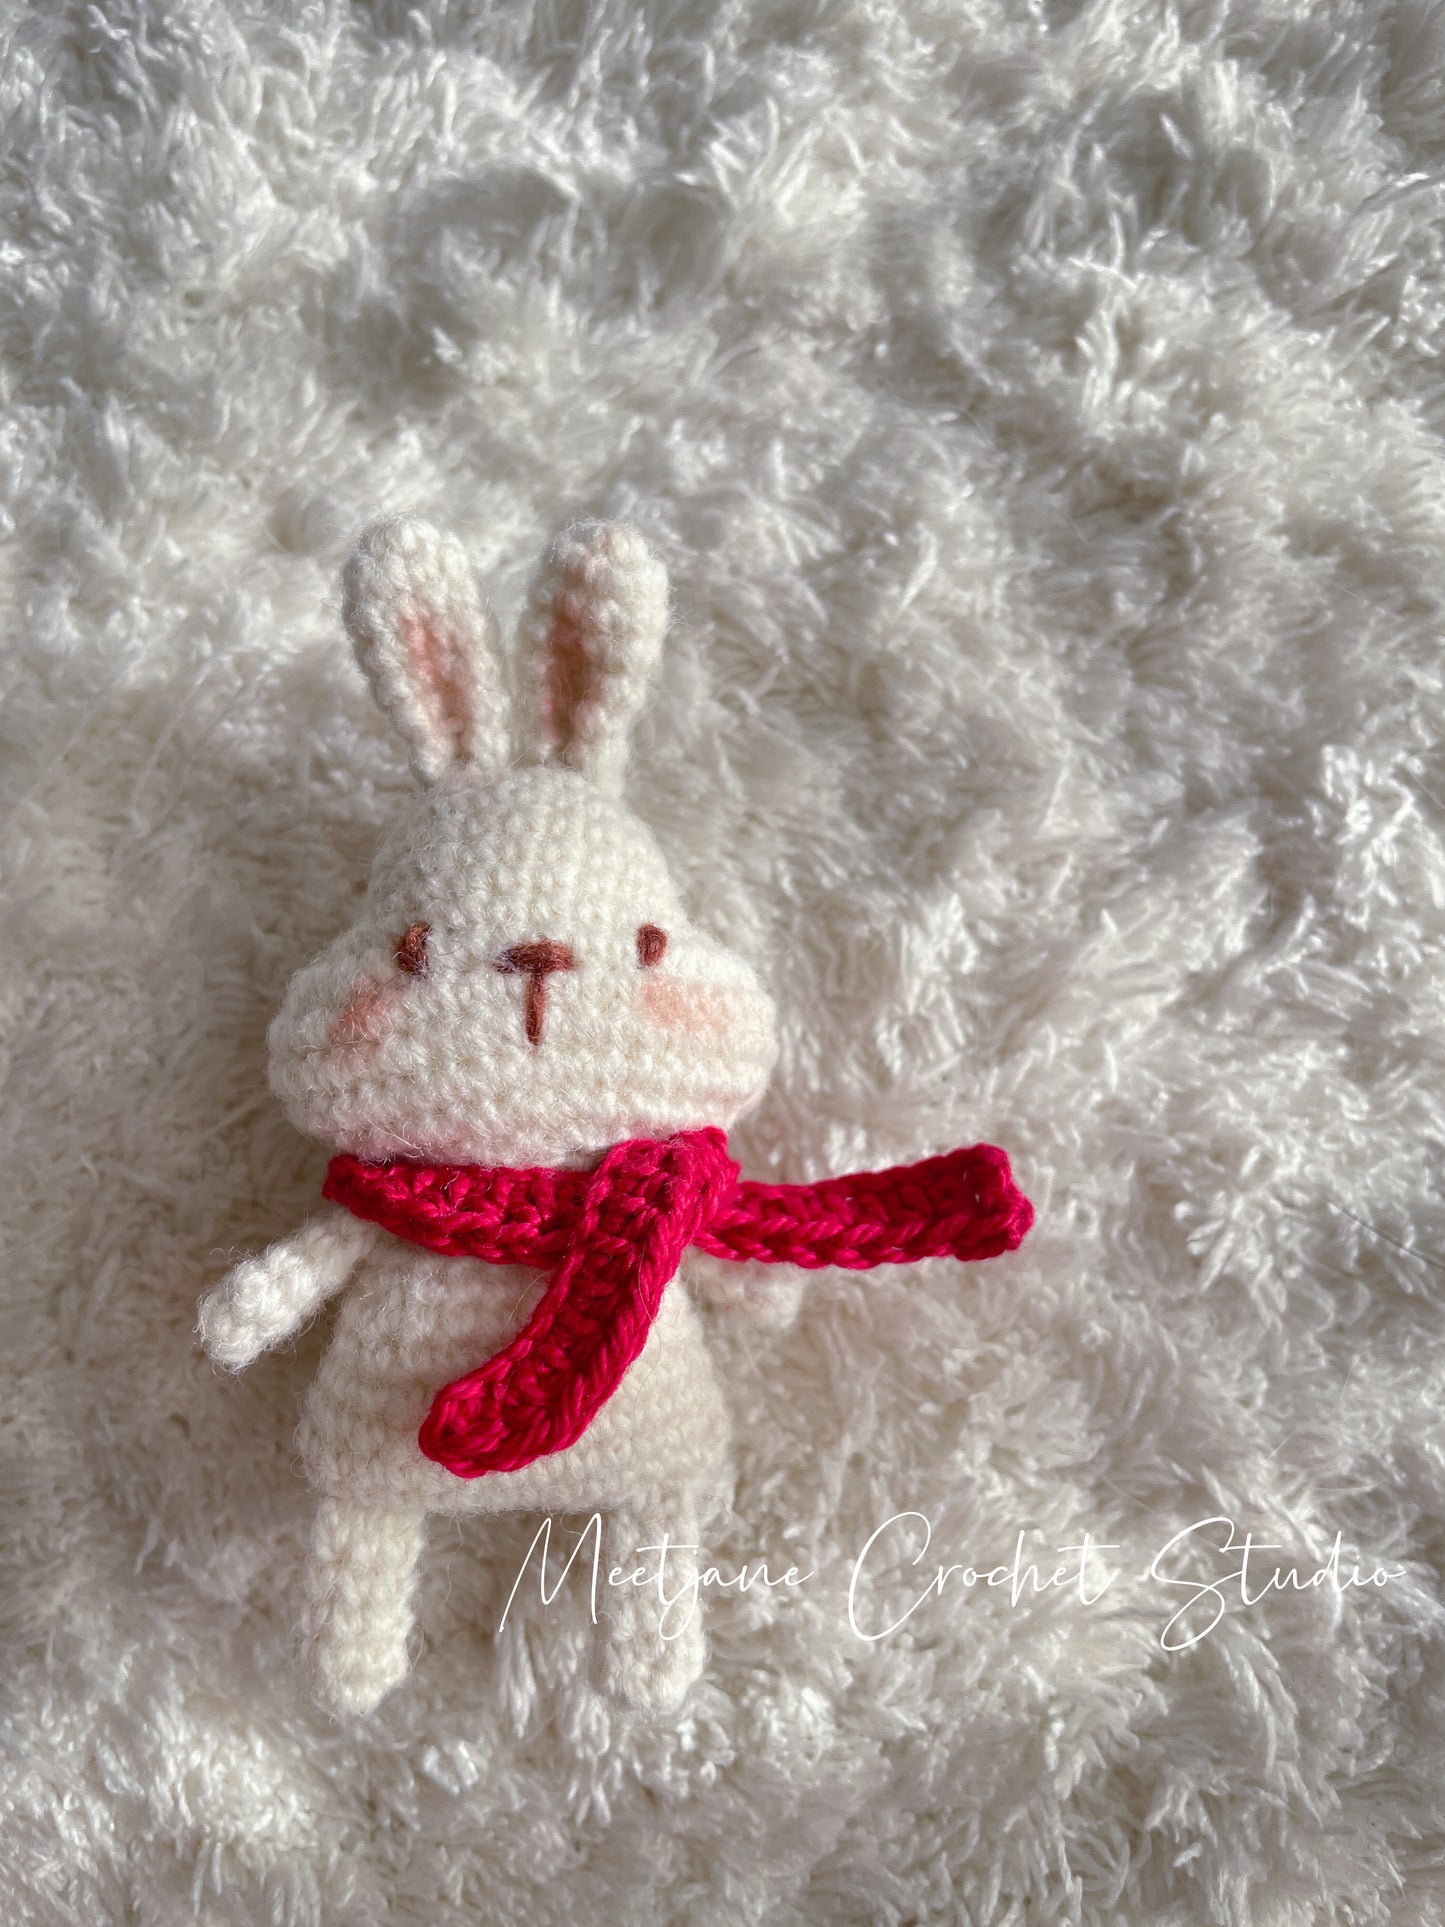 Crochet accessories| Melbourne |Rabbit brooches|NEW YEAR EDITION